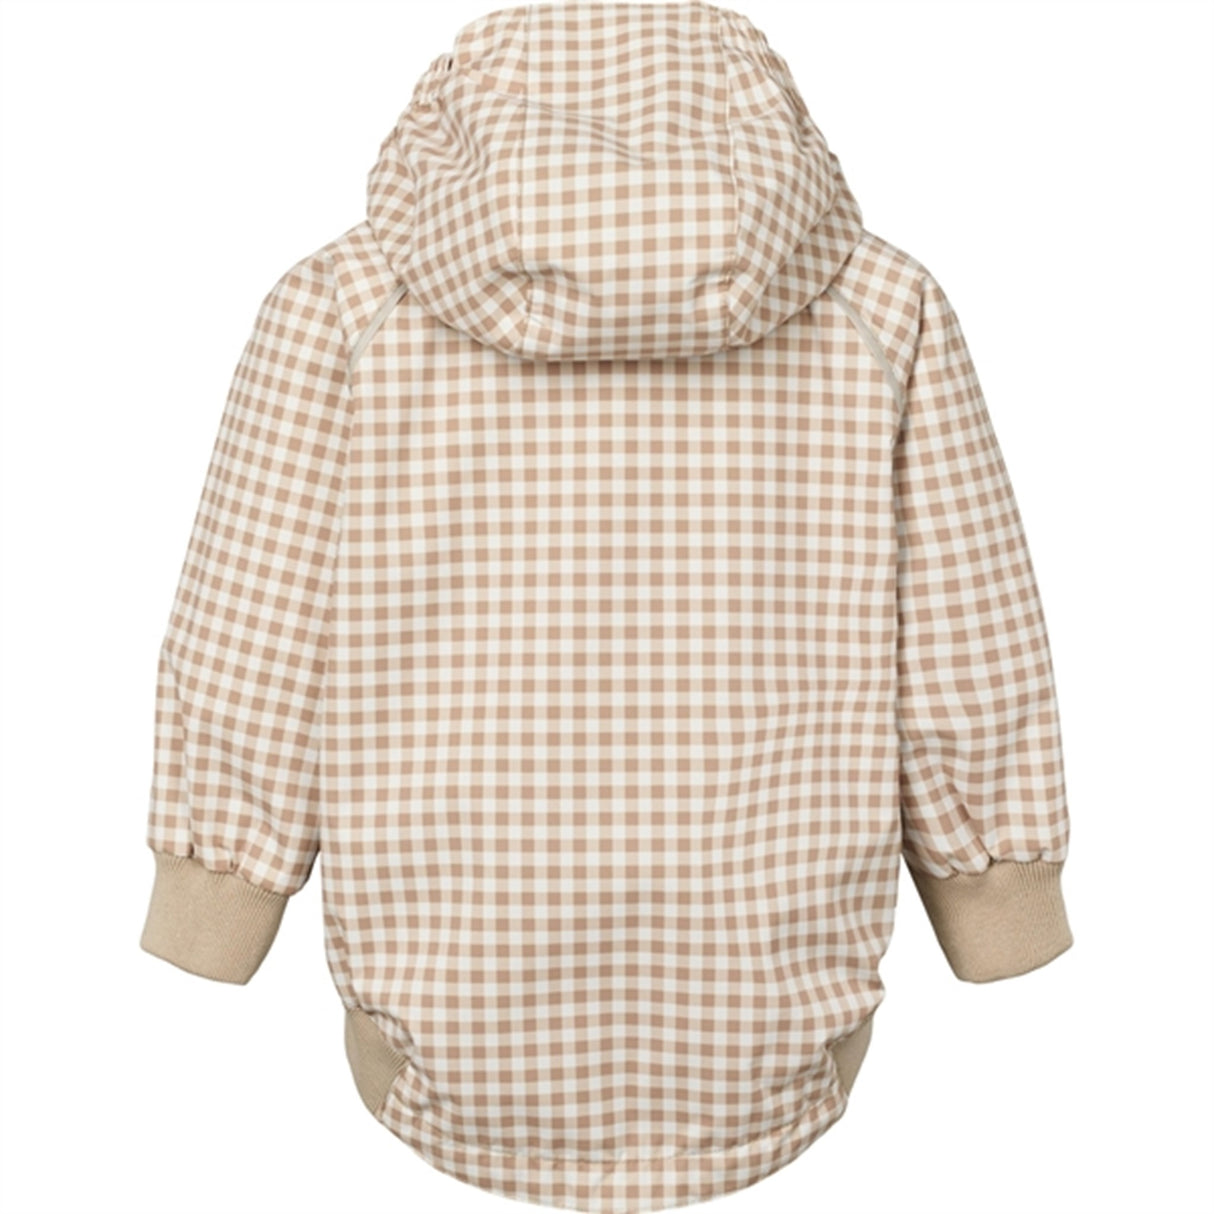 MarMar Olio Jacket Gingham Check Technical Summer Outerwear 2